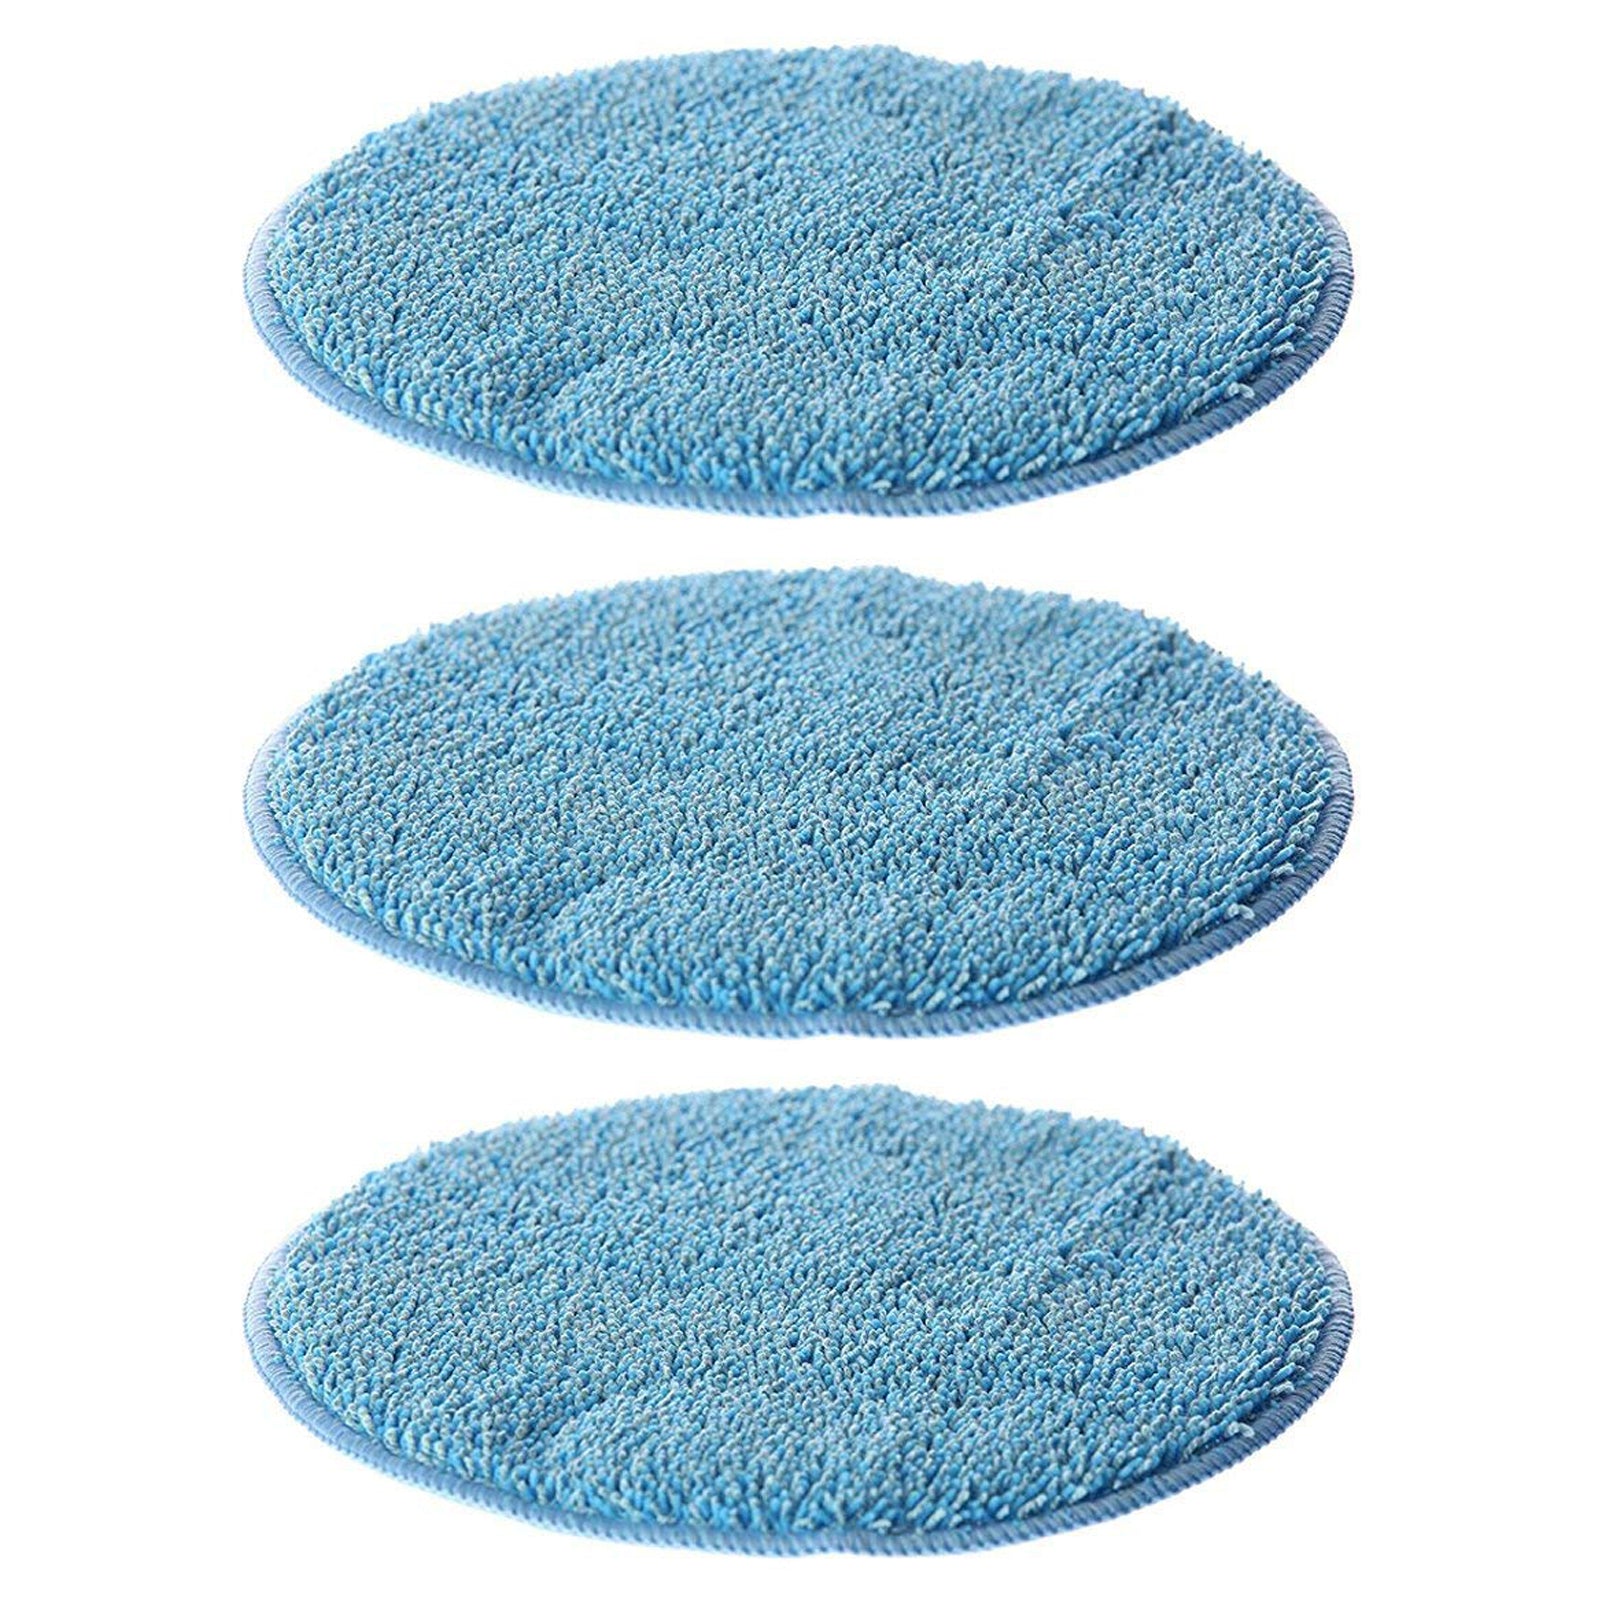 AMOS Super Scrubber Replacement Brush Heads